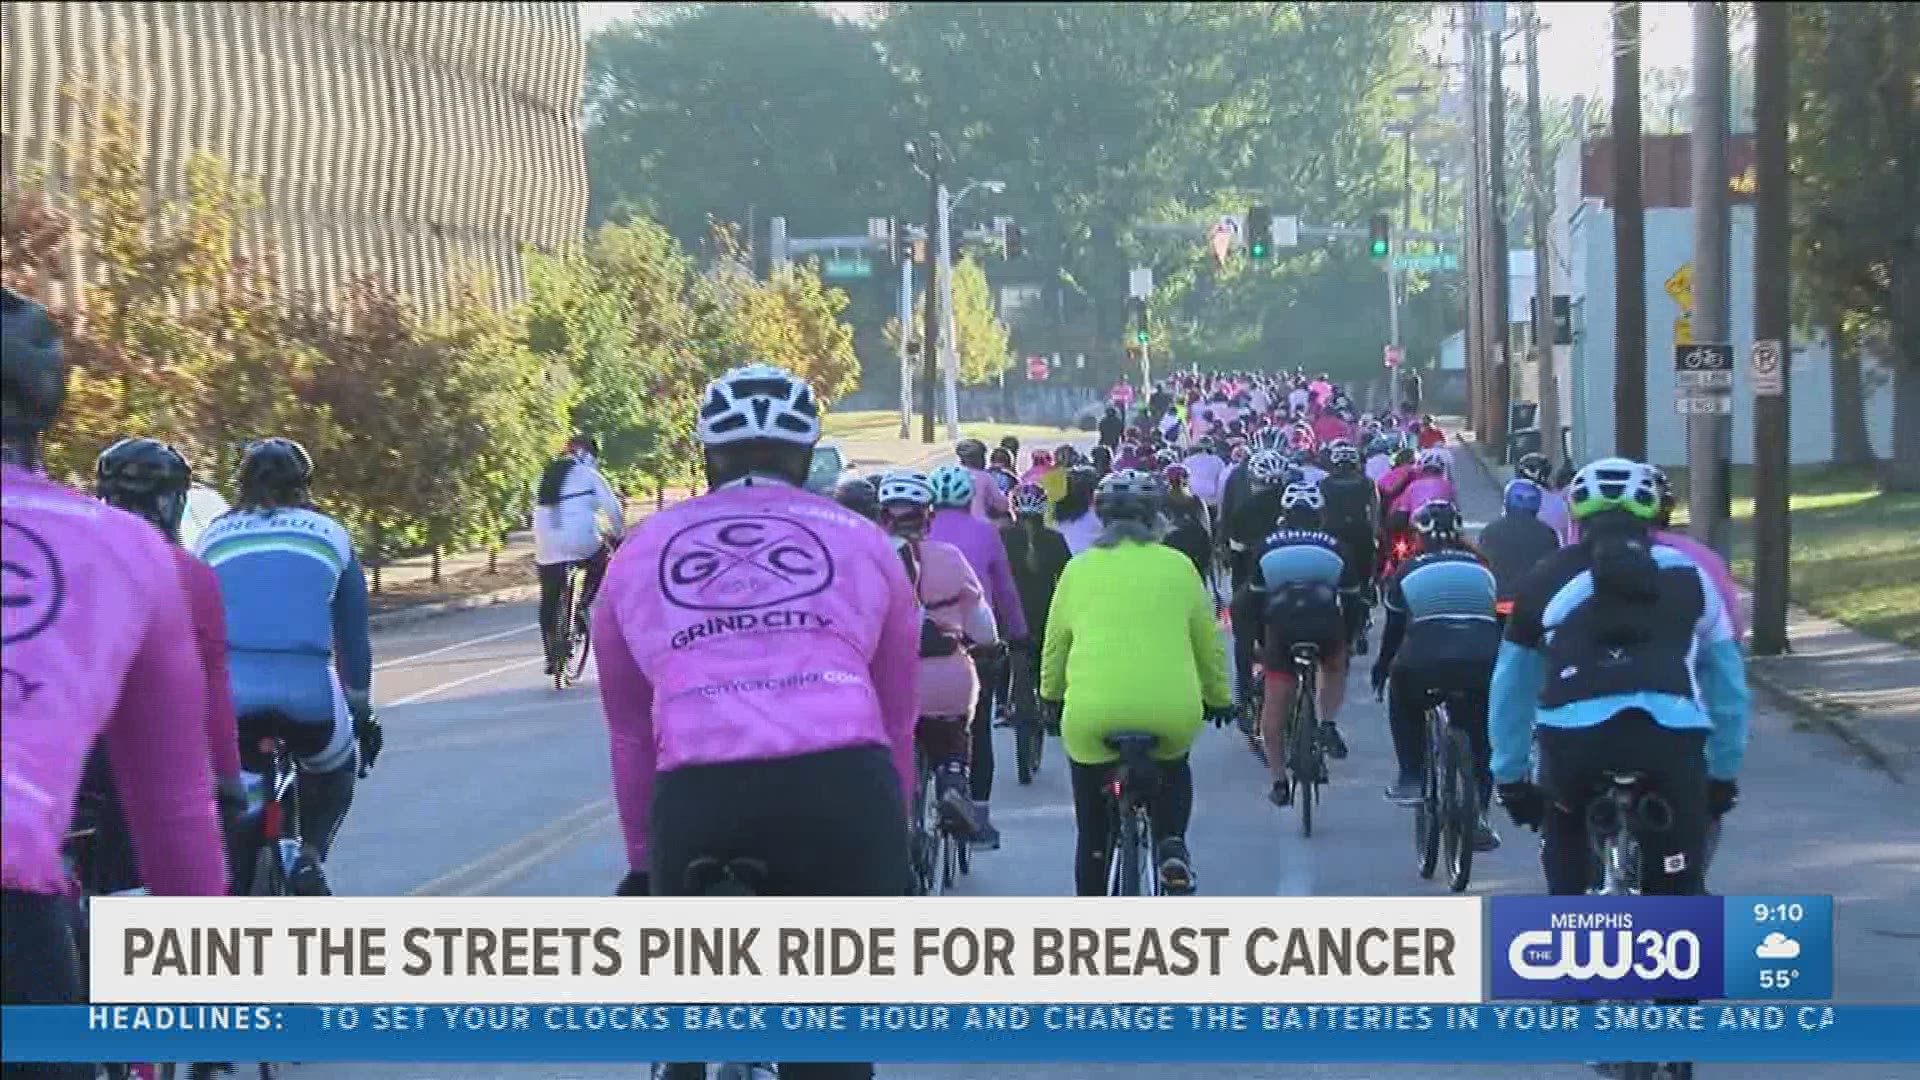 Supporters cycled 20 miles to raise money in support of breast cancer awareness. They also presented a check to the Susan G. Komen foundation.